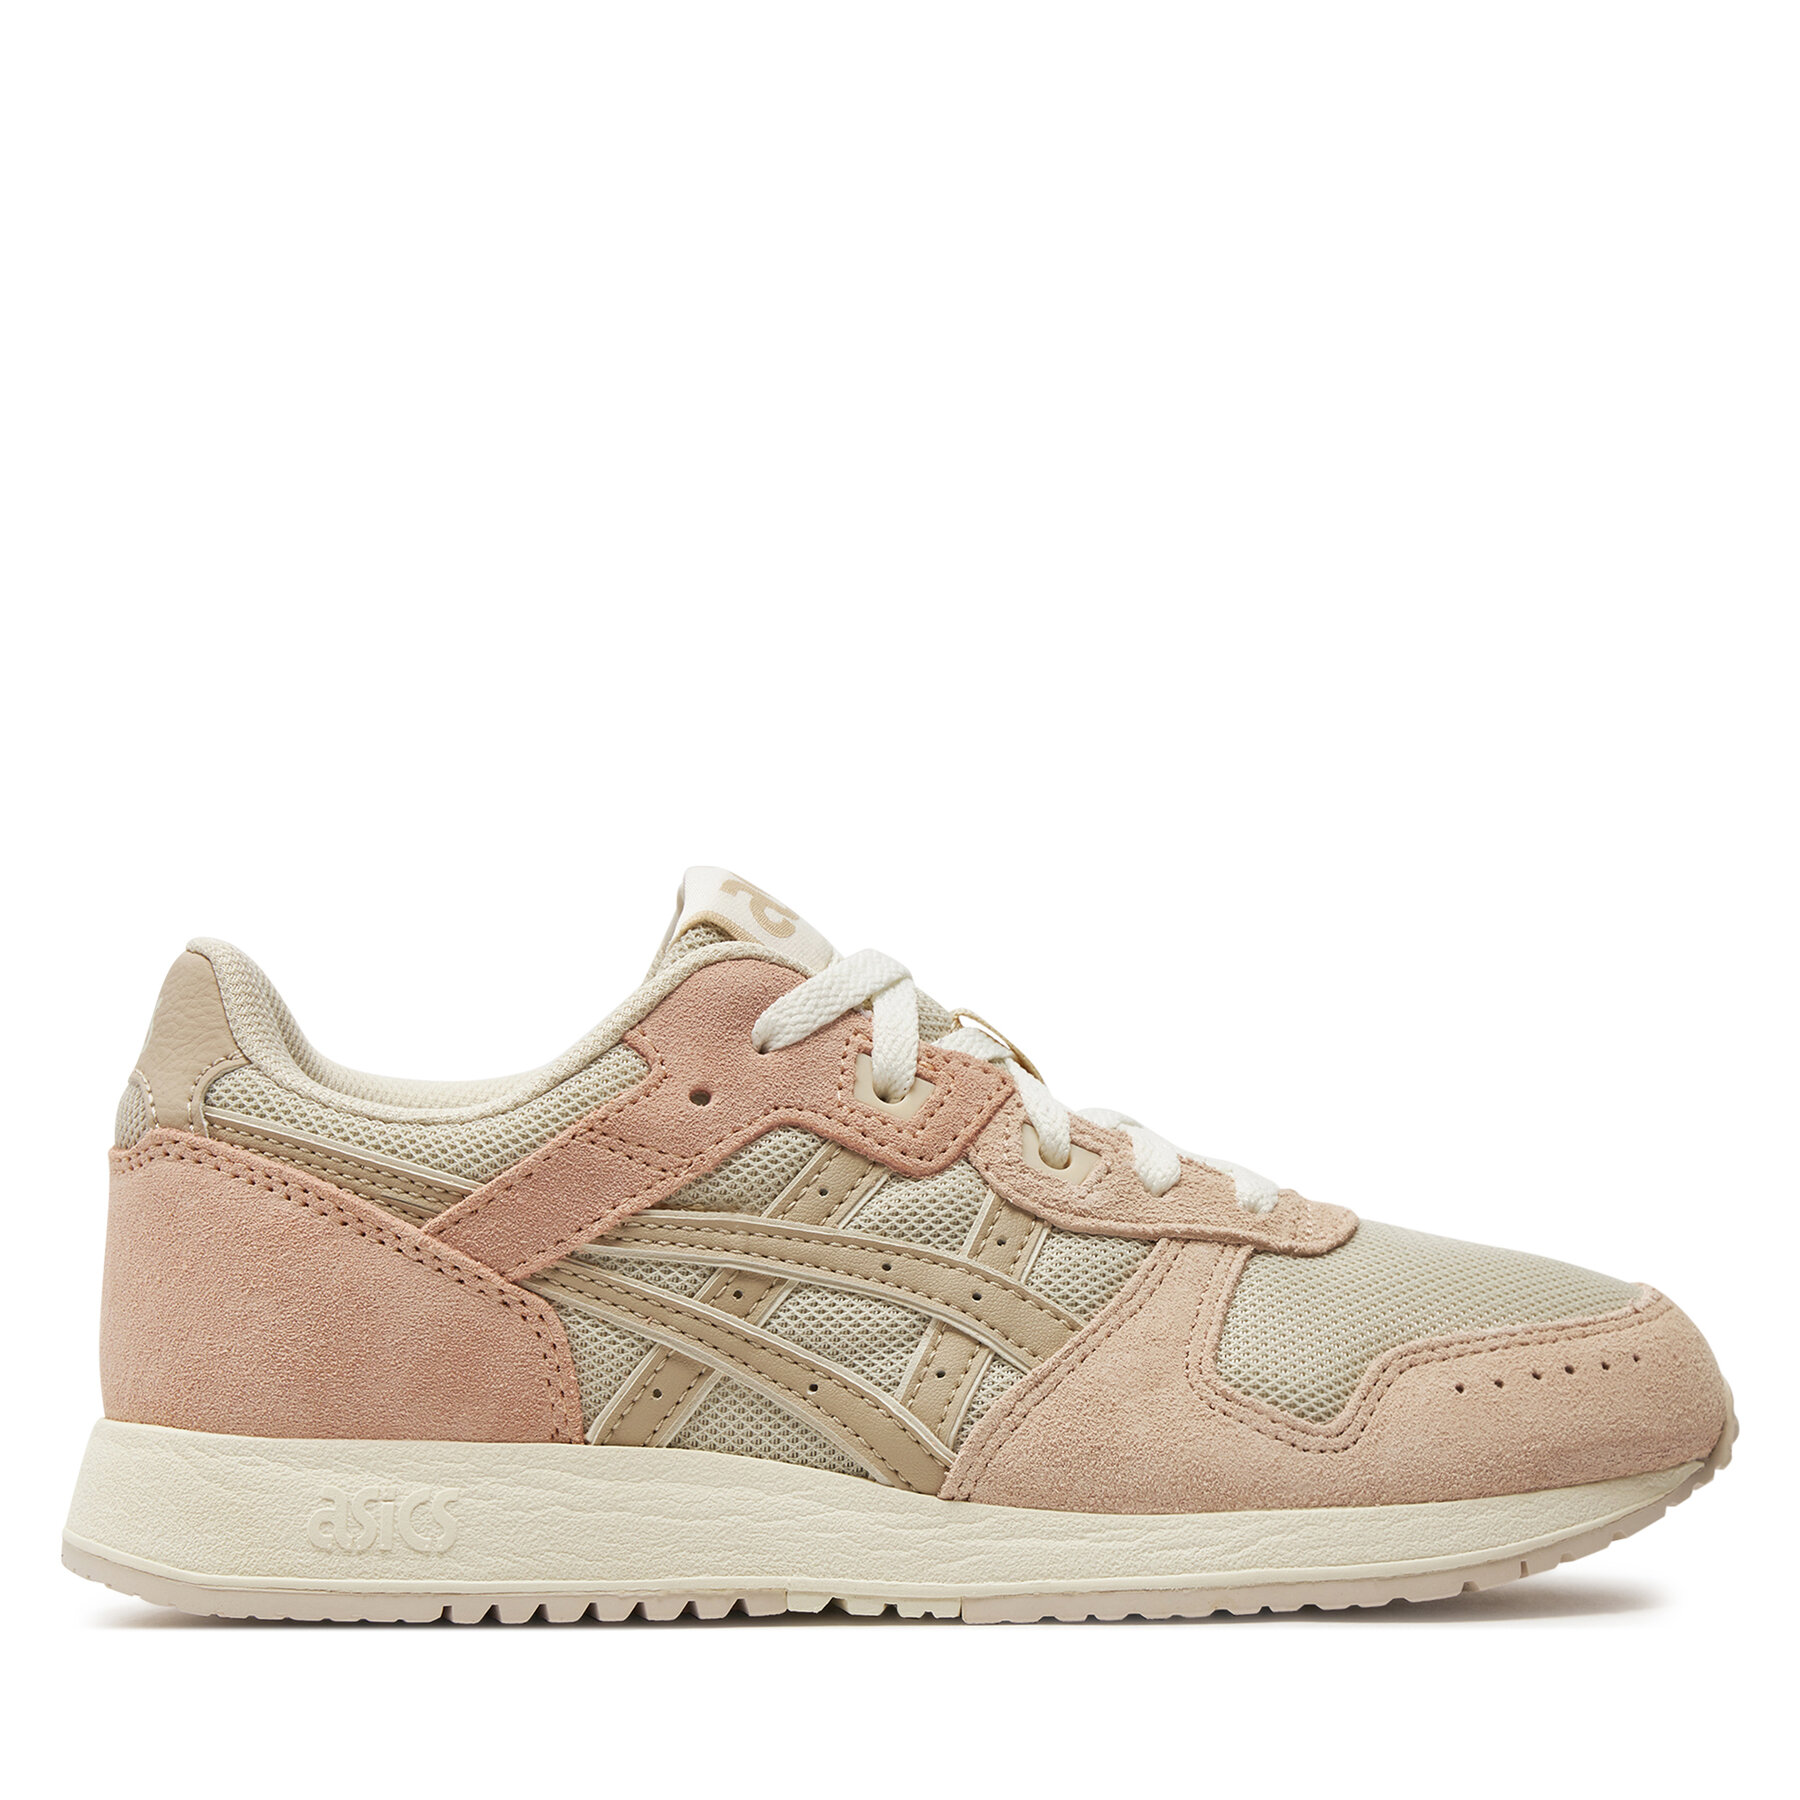 Schuhe Asics Lyte Classic 1202A306 Oatmeal/Simply Taupe 251 von ASICS